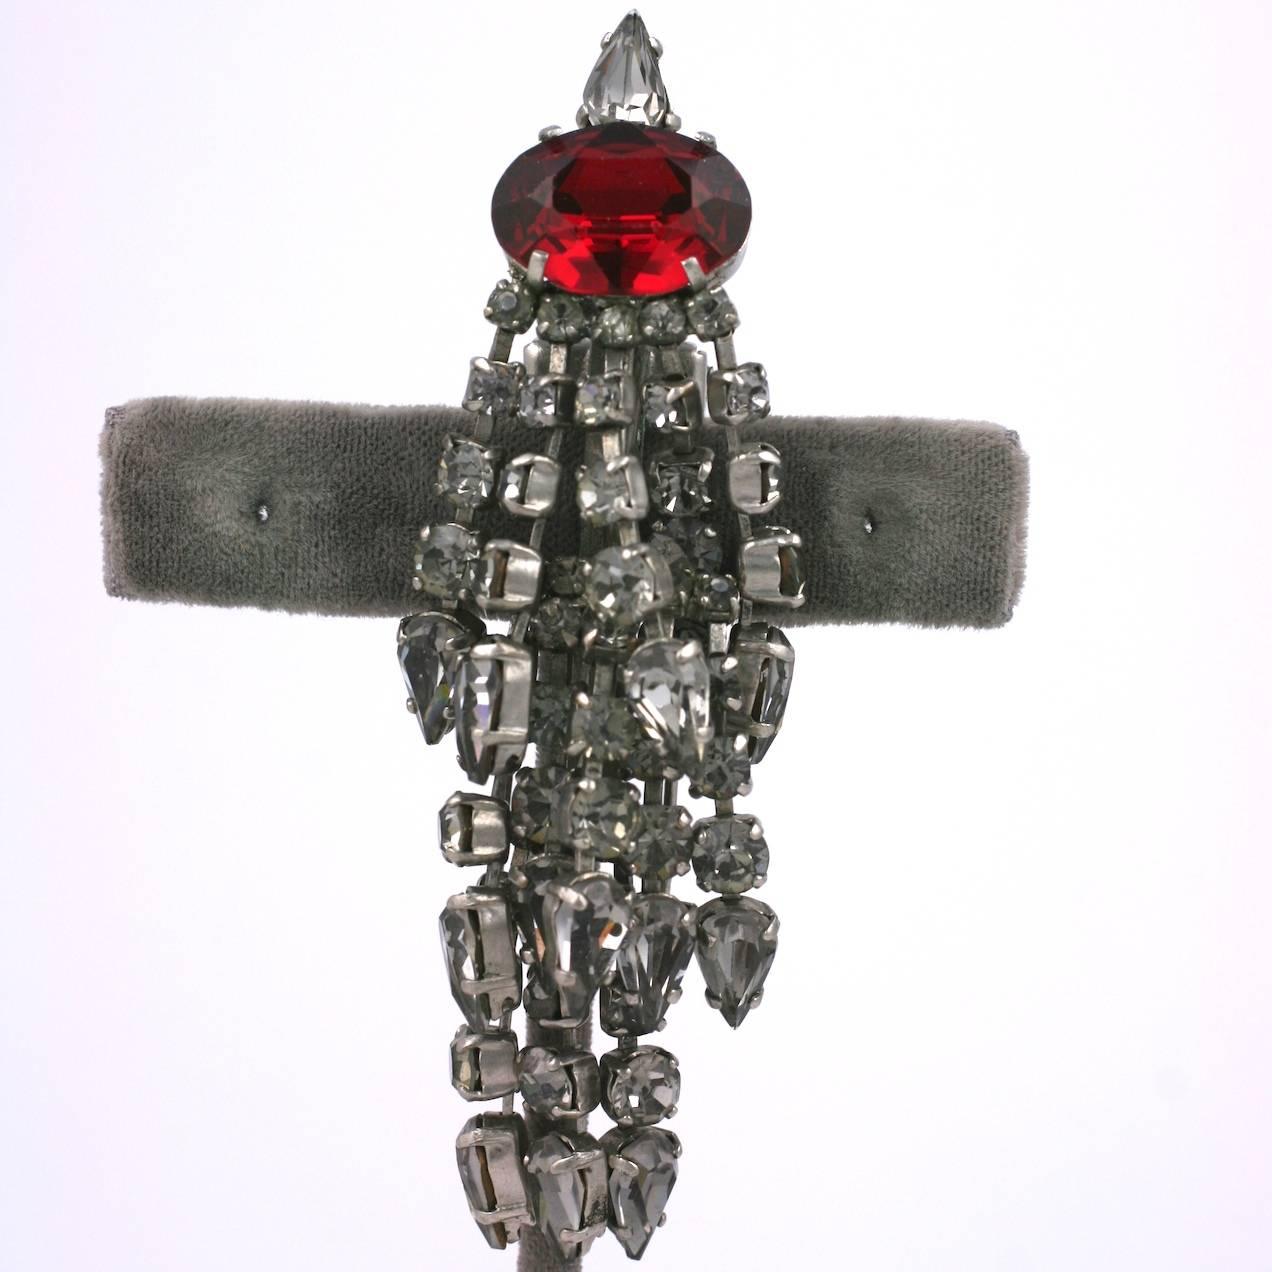 Balenciaga tremblant Tassel Clip brooch of  prong set fringed gray crystal pastes with a large faux ruby focal stone, forming the tassels head.
Made in France, marked Depose. 1950's France. Excellent Condition
Length 3. 3/4